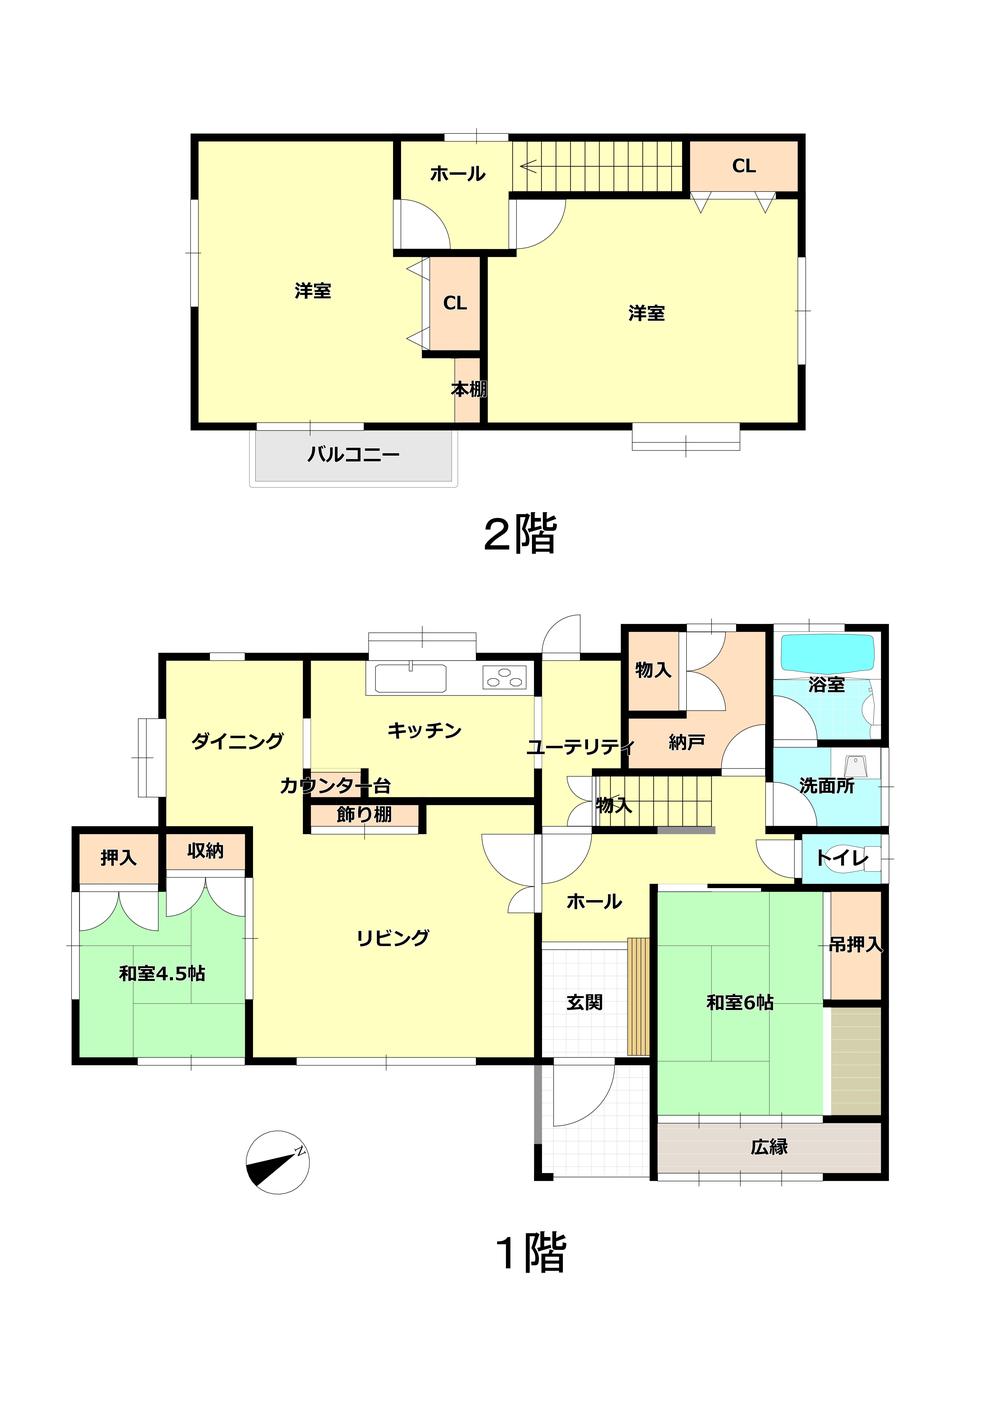 Floor plan. 8.8 million yen, 4LDK, Land area 266.32 sq m , We will give priority to the building area 127.31 sq m Current Status. 